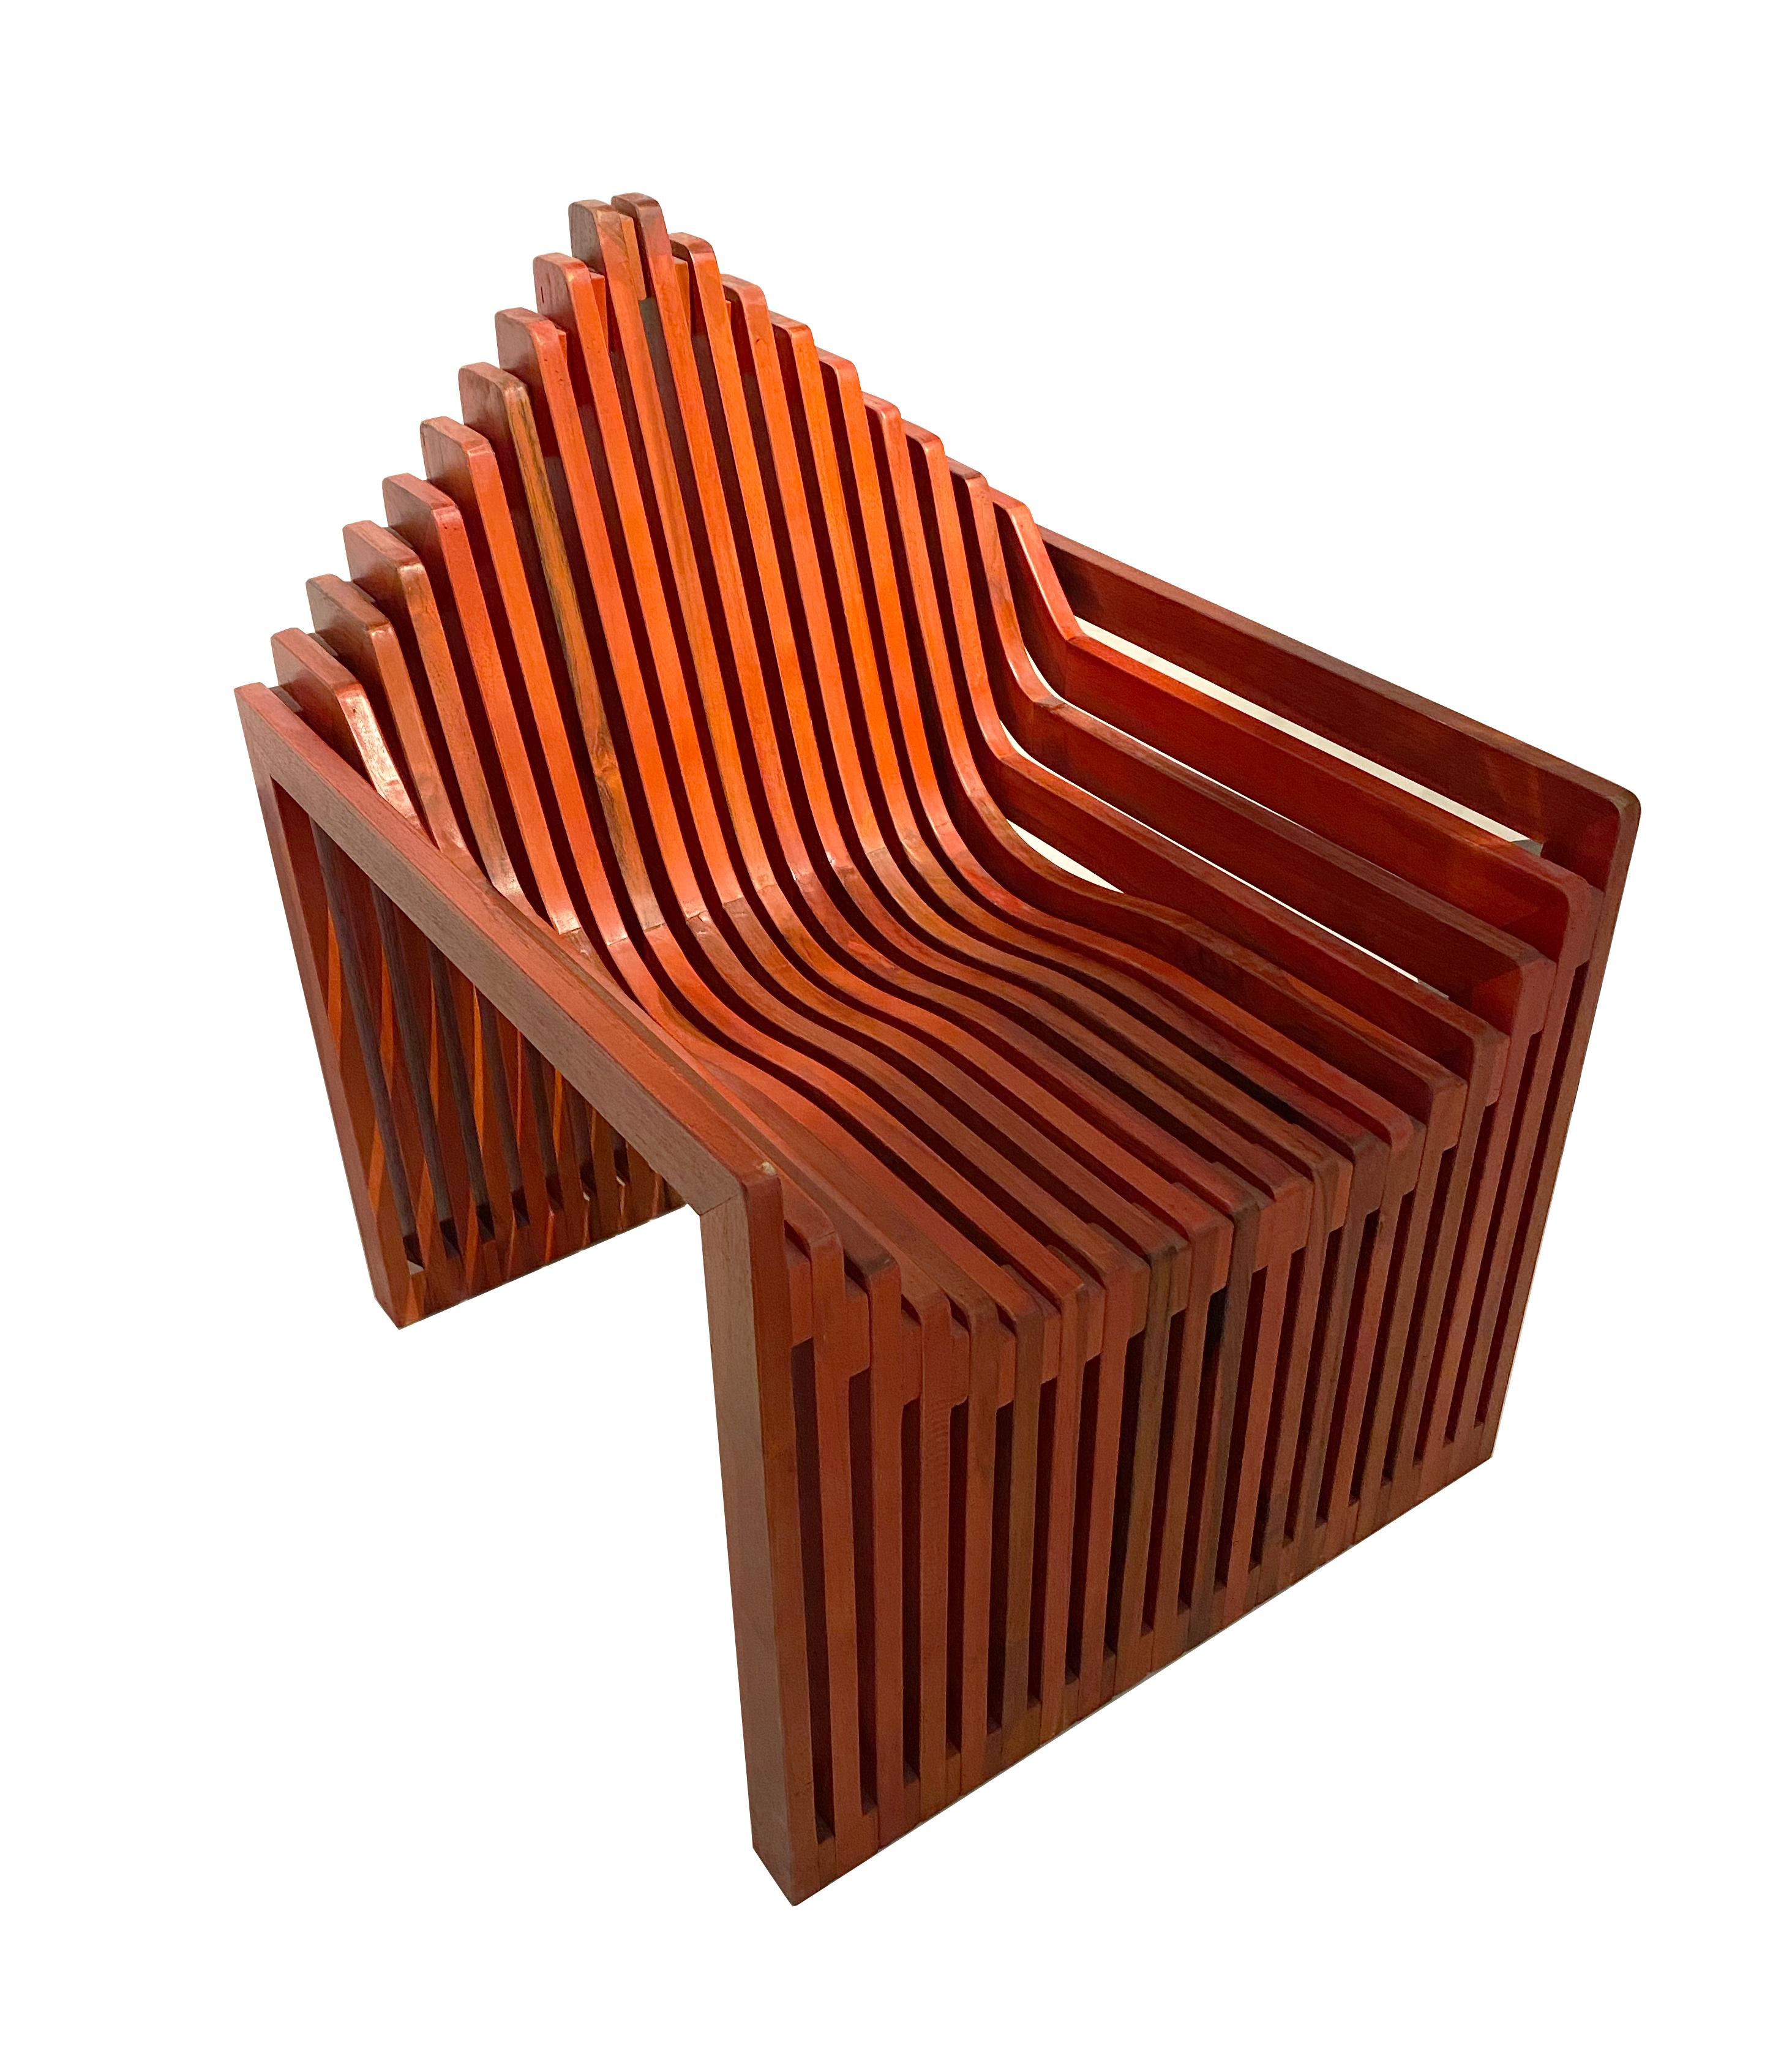 Handcrafted parametric chair made of solid teak wood. This stunning red-stained accent chair is part of the Fabri Collection by John Brevard. The Fabri collection features fabric-like weaving landscapes which unite to become one.  These pieces are